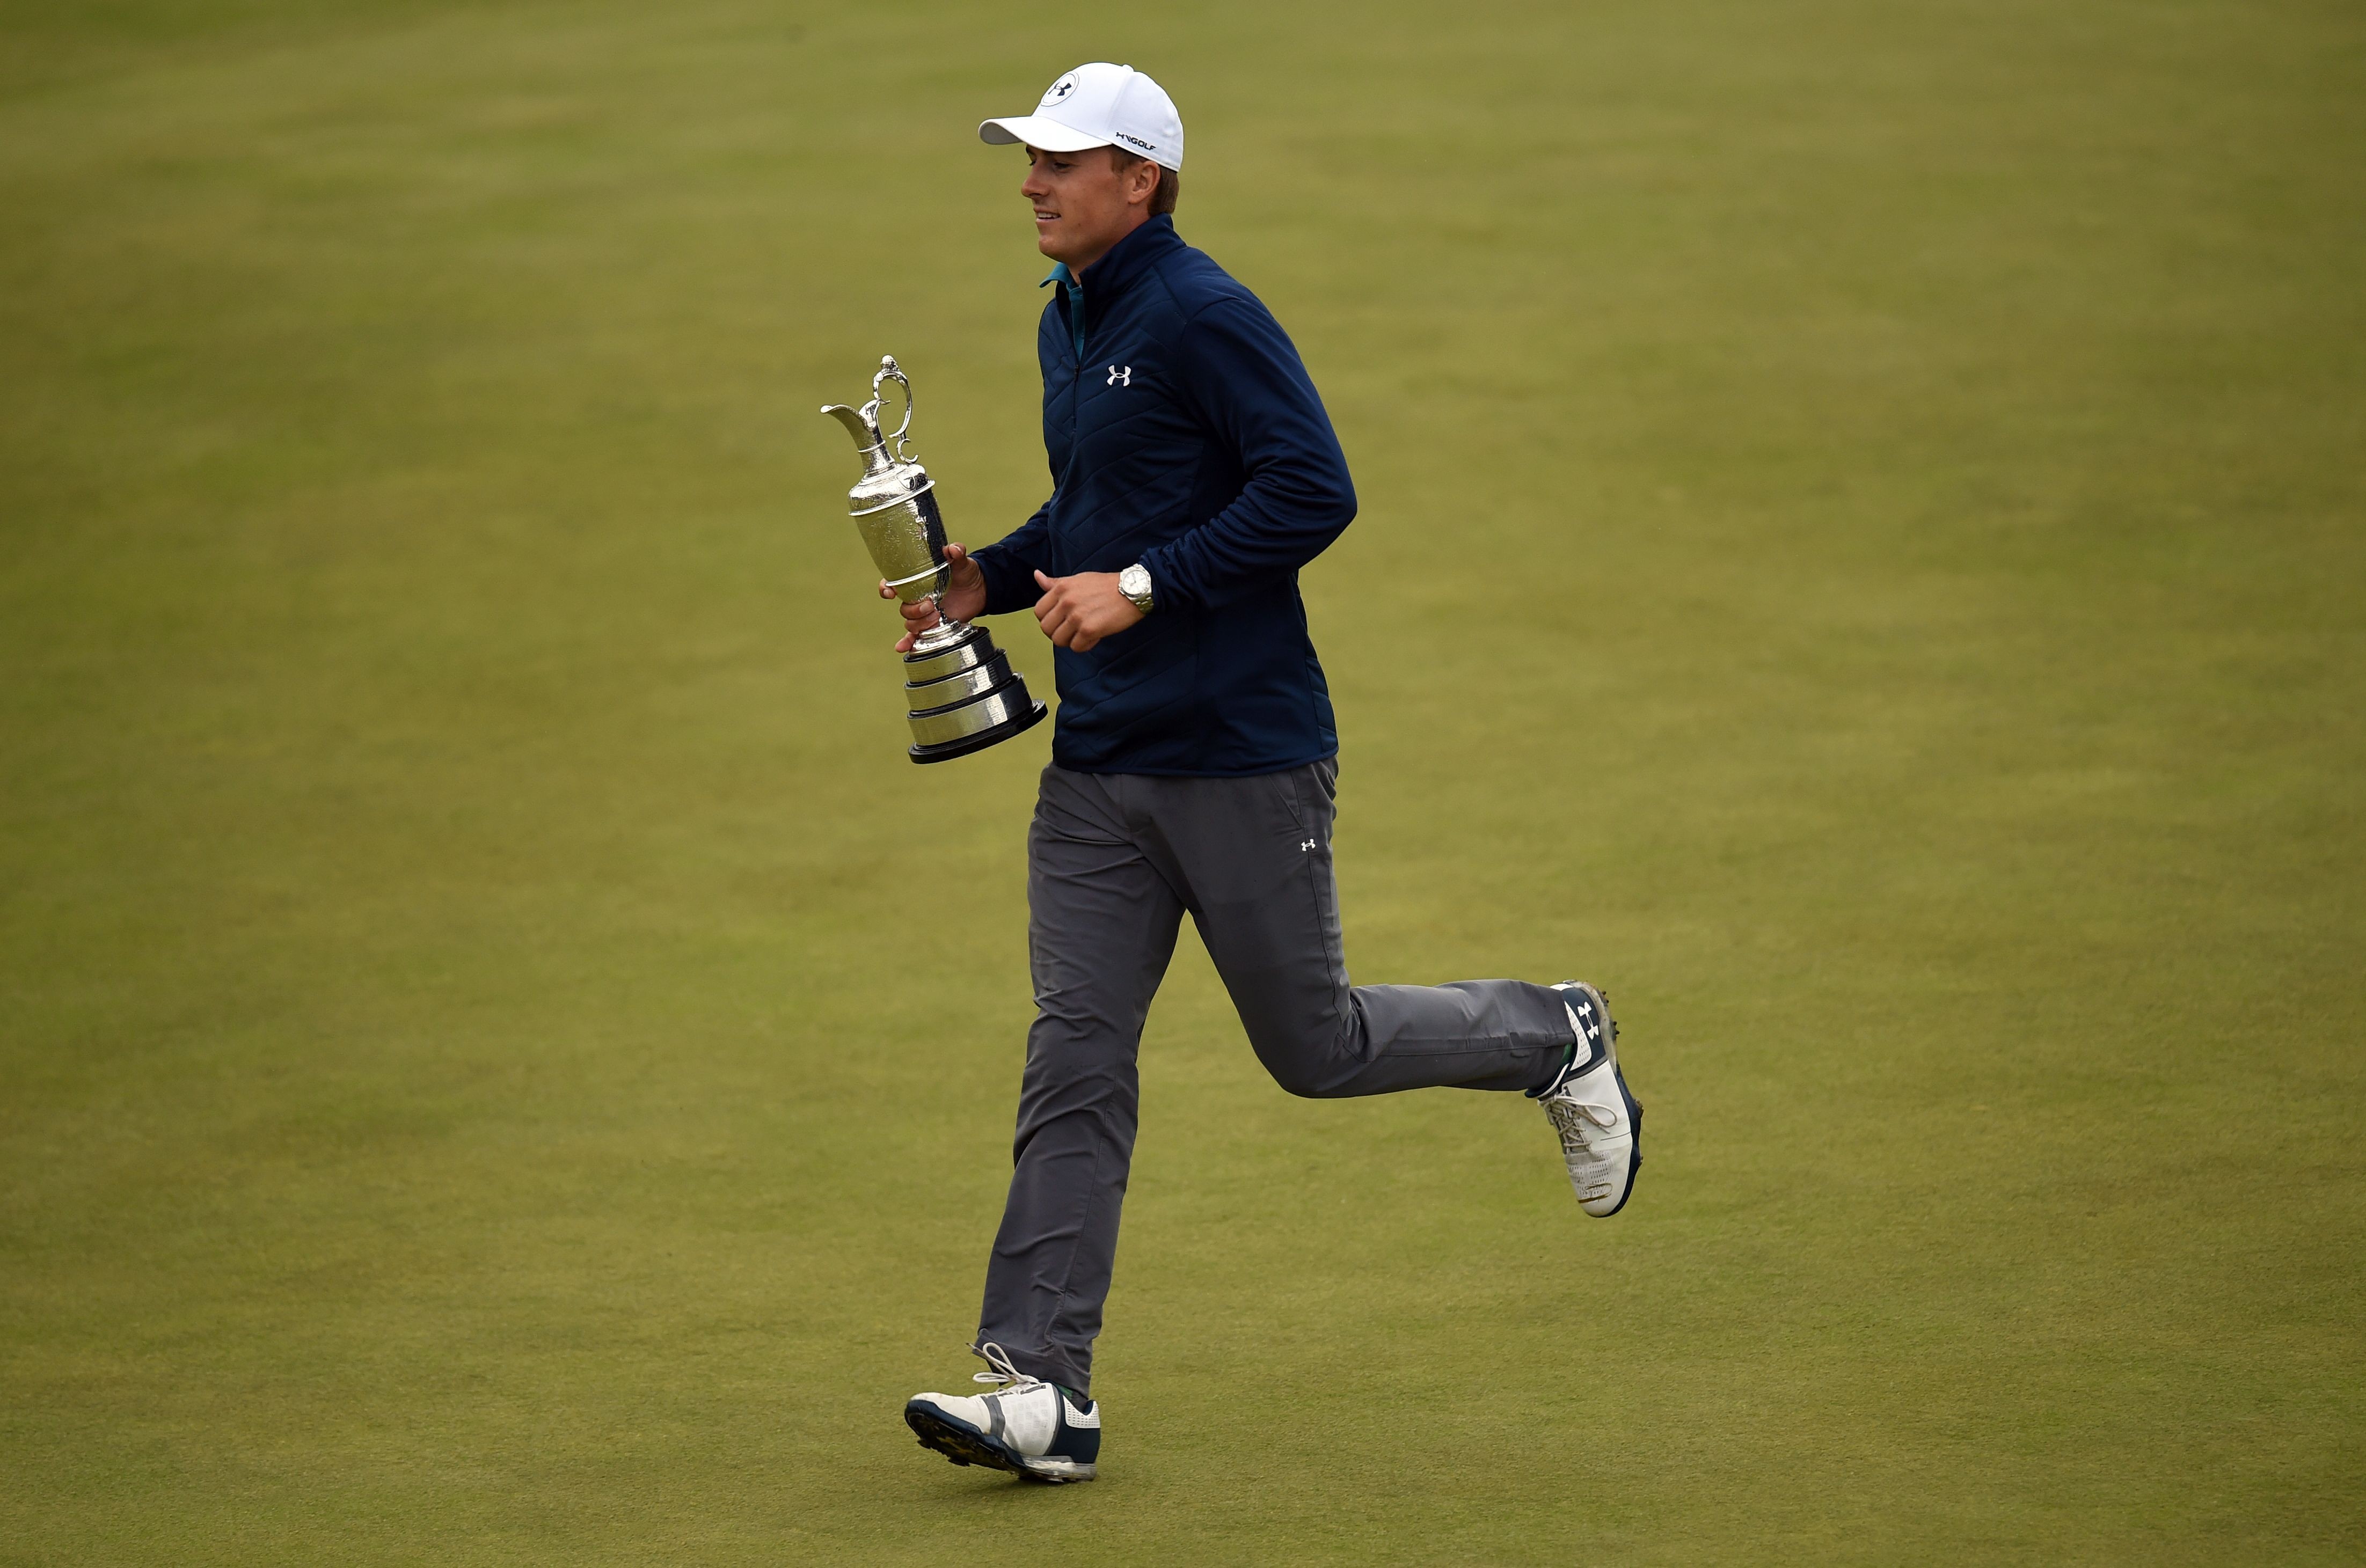 Jordan Spieth eyes career grand slam running away with Open | South China Post